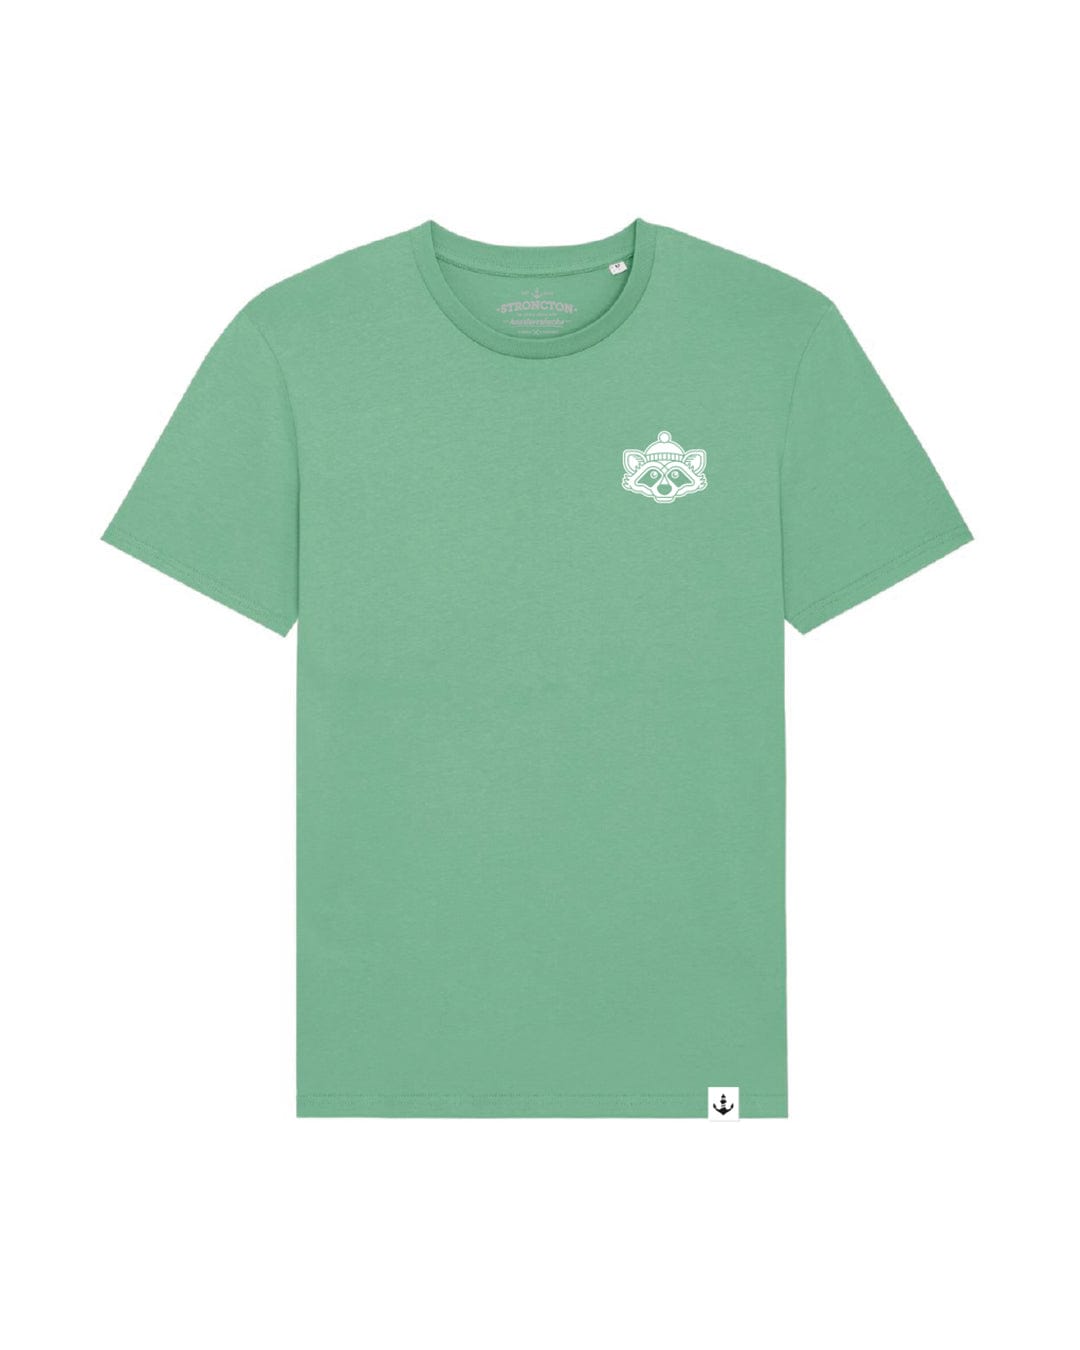 Fred Stroncton T-Shirt (Dusty Mint)